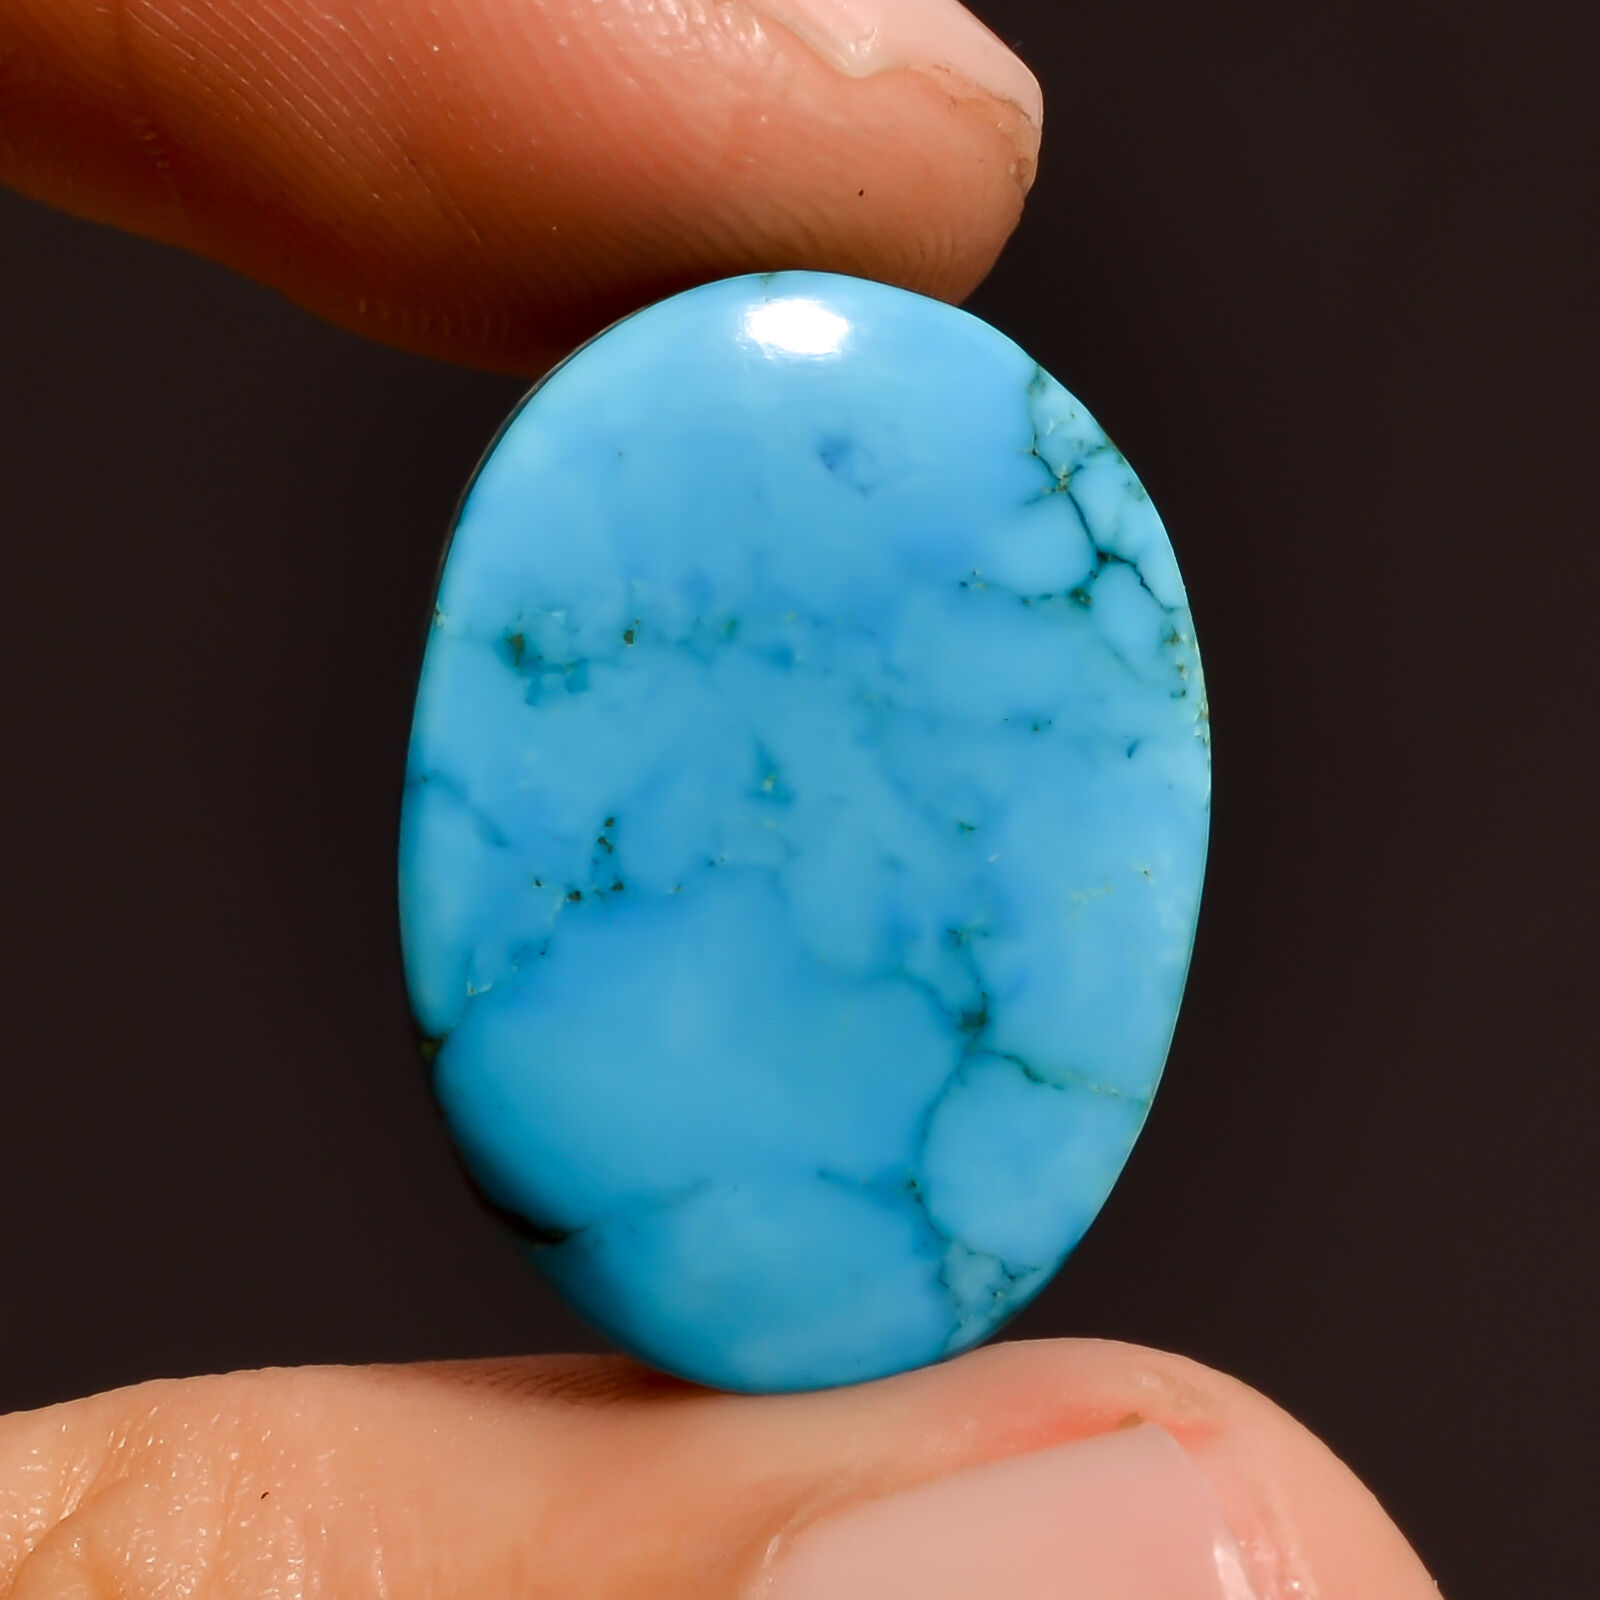 Aaa+ 100% Natural Blue Howlite Oval Cabochon Loose Gemstone 18.15 Ct. 20x15x9 Mm